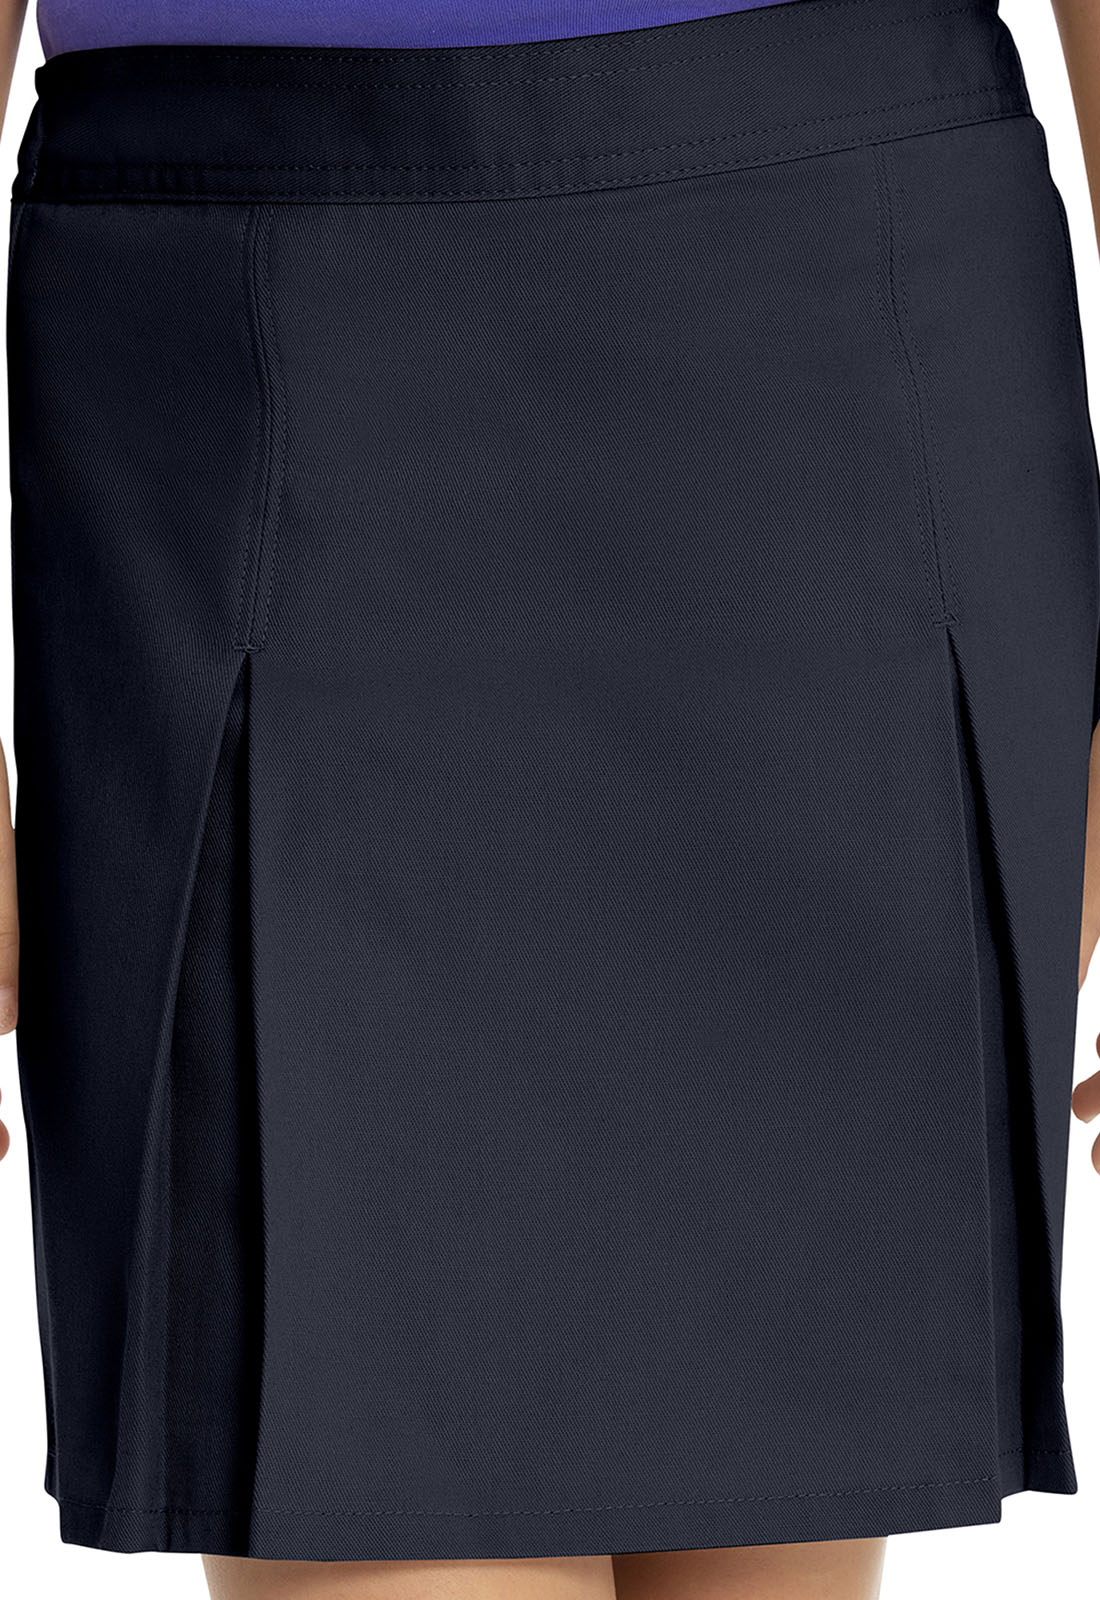 Real School Girls School Uniform Pleat Front Scooter Skirt, Sizes 4-16 & Plus - image 3 of 6